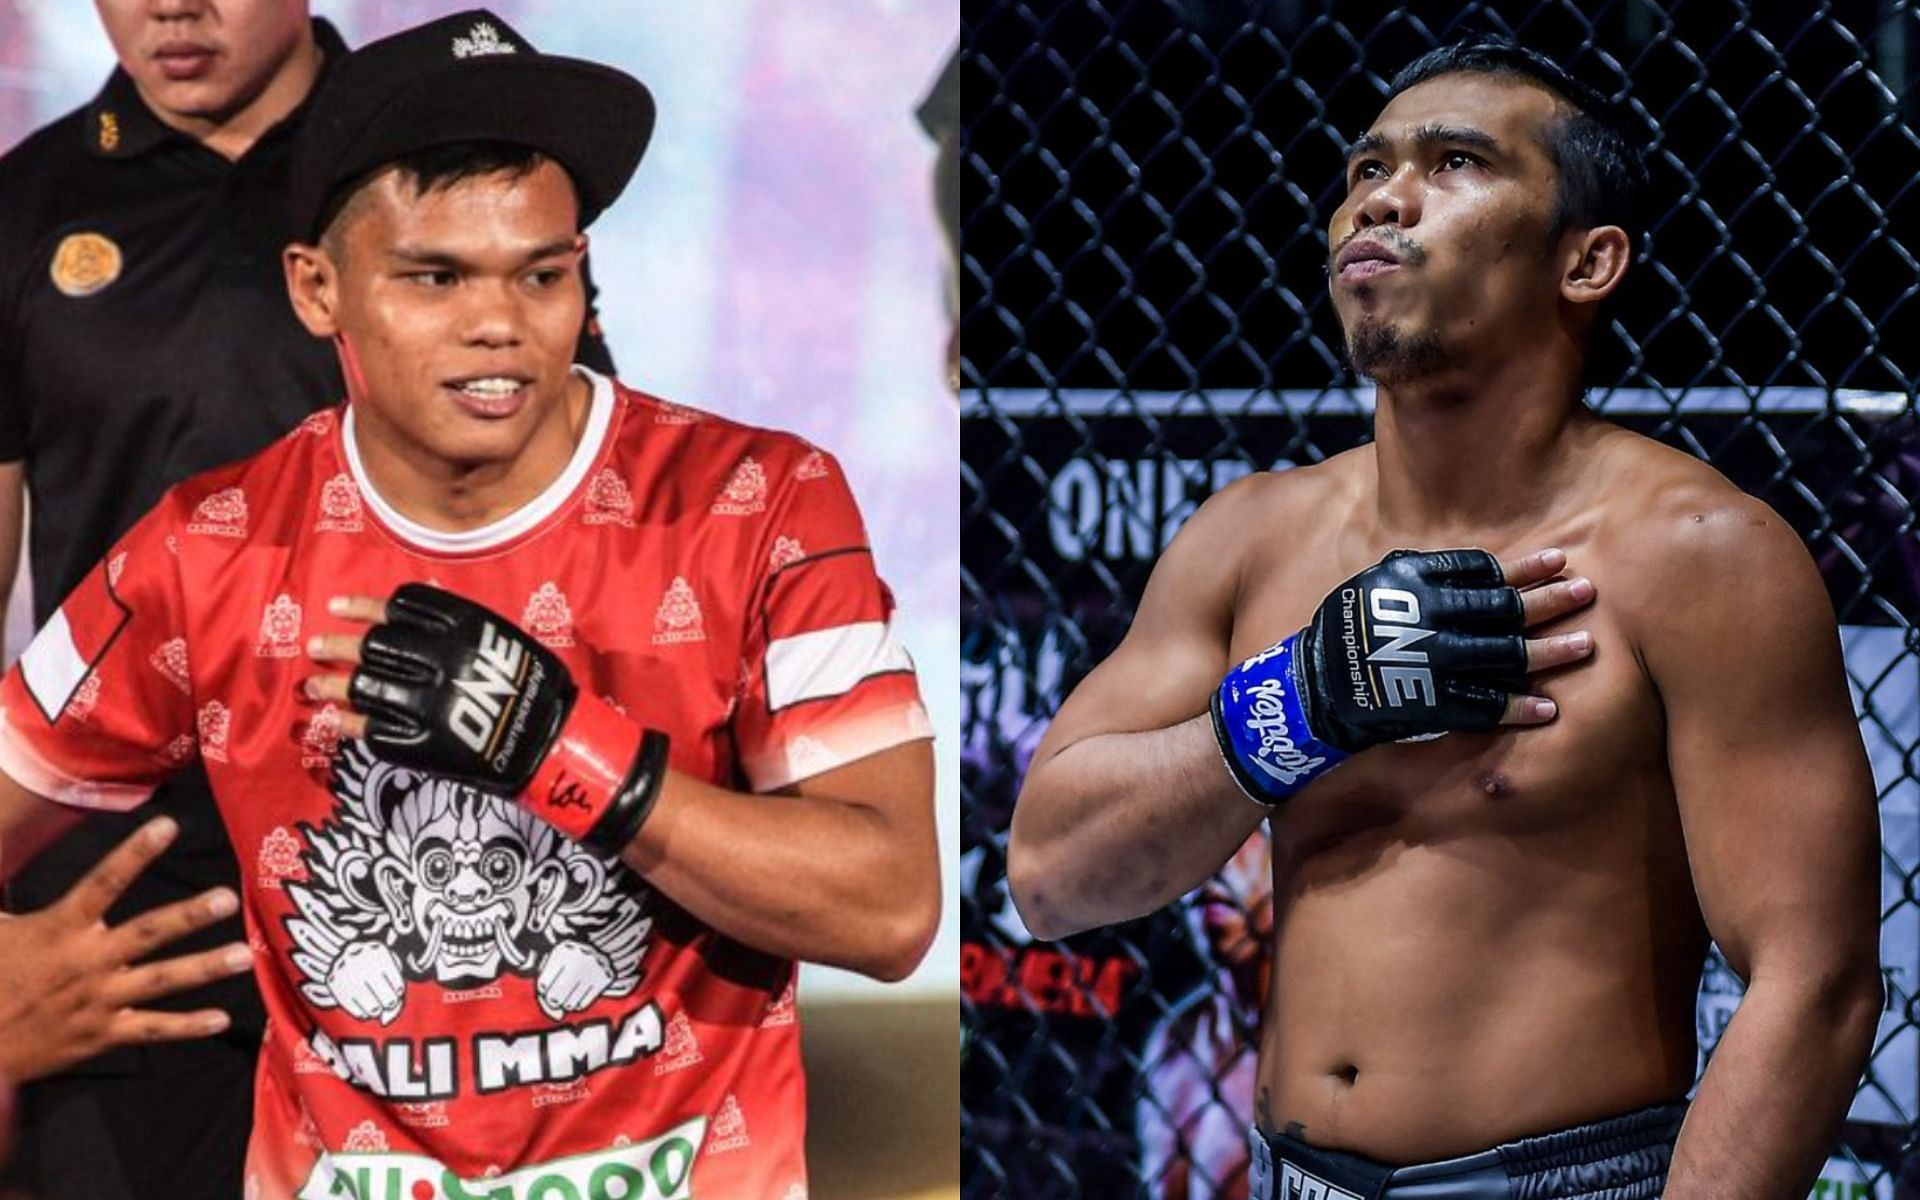 Robin Catalan (right) plans to get either a knockout or submission against Elipitua Siregar at ONE 157. [Photos ONE Championship]